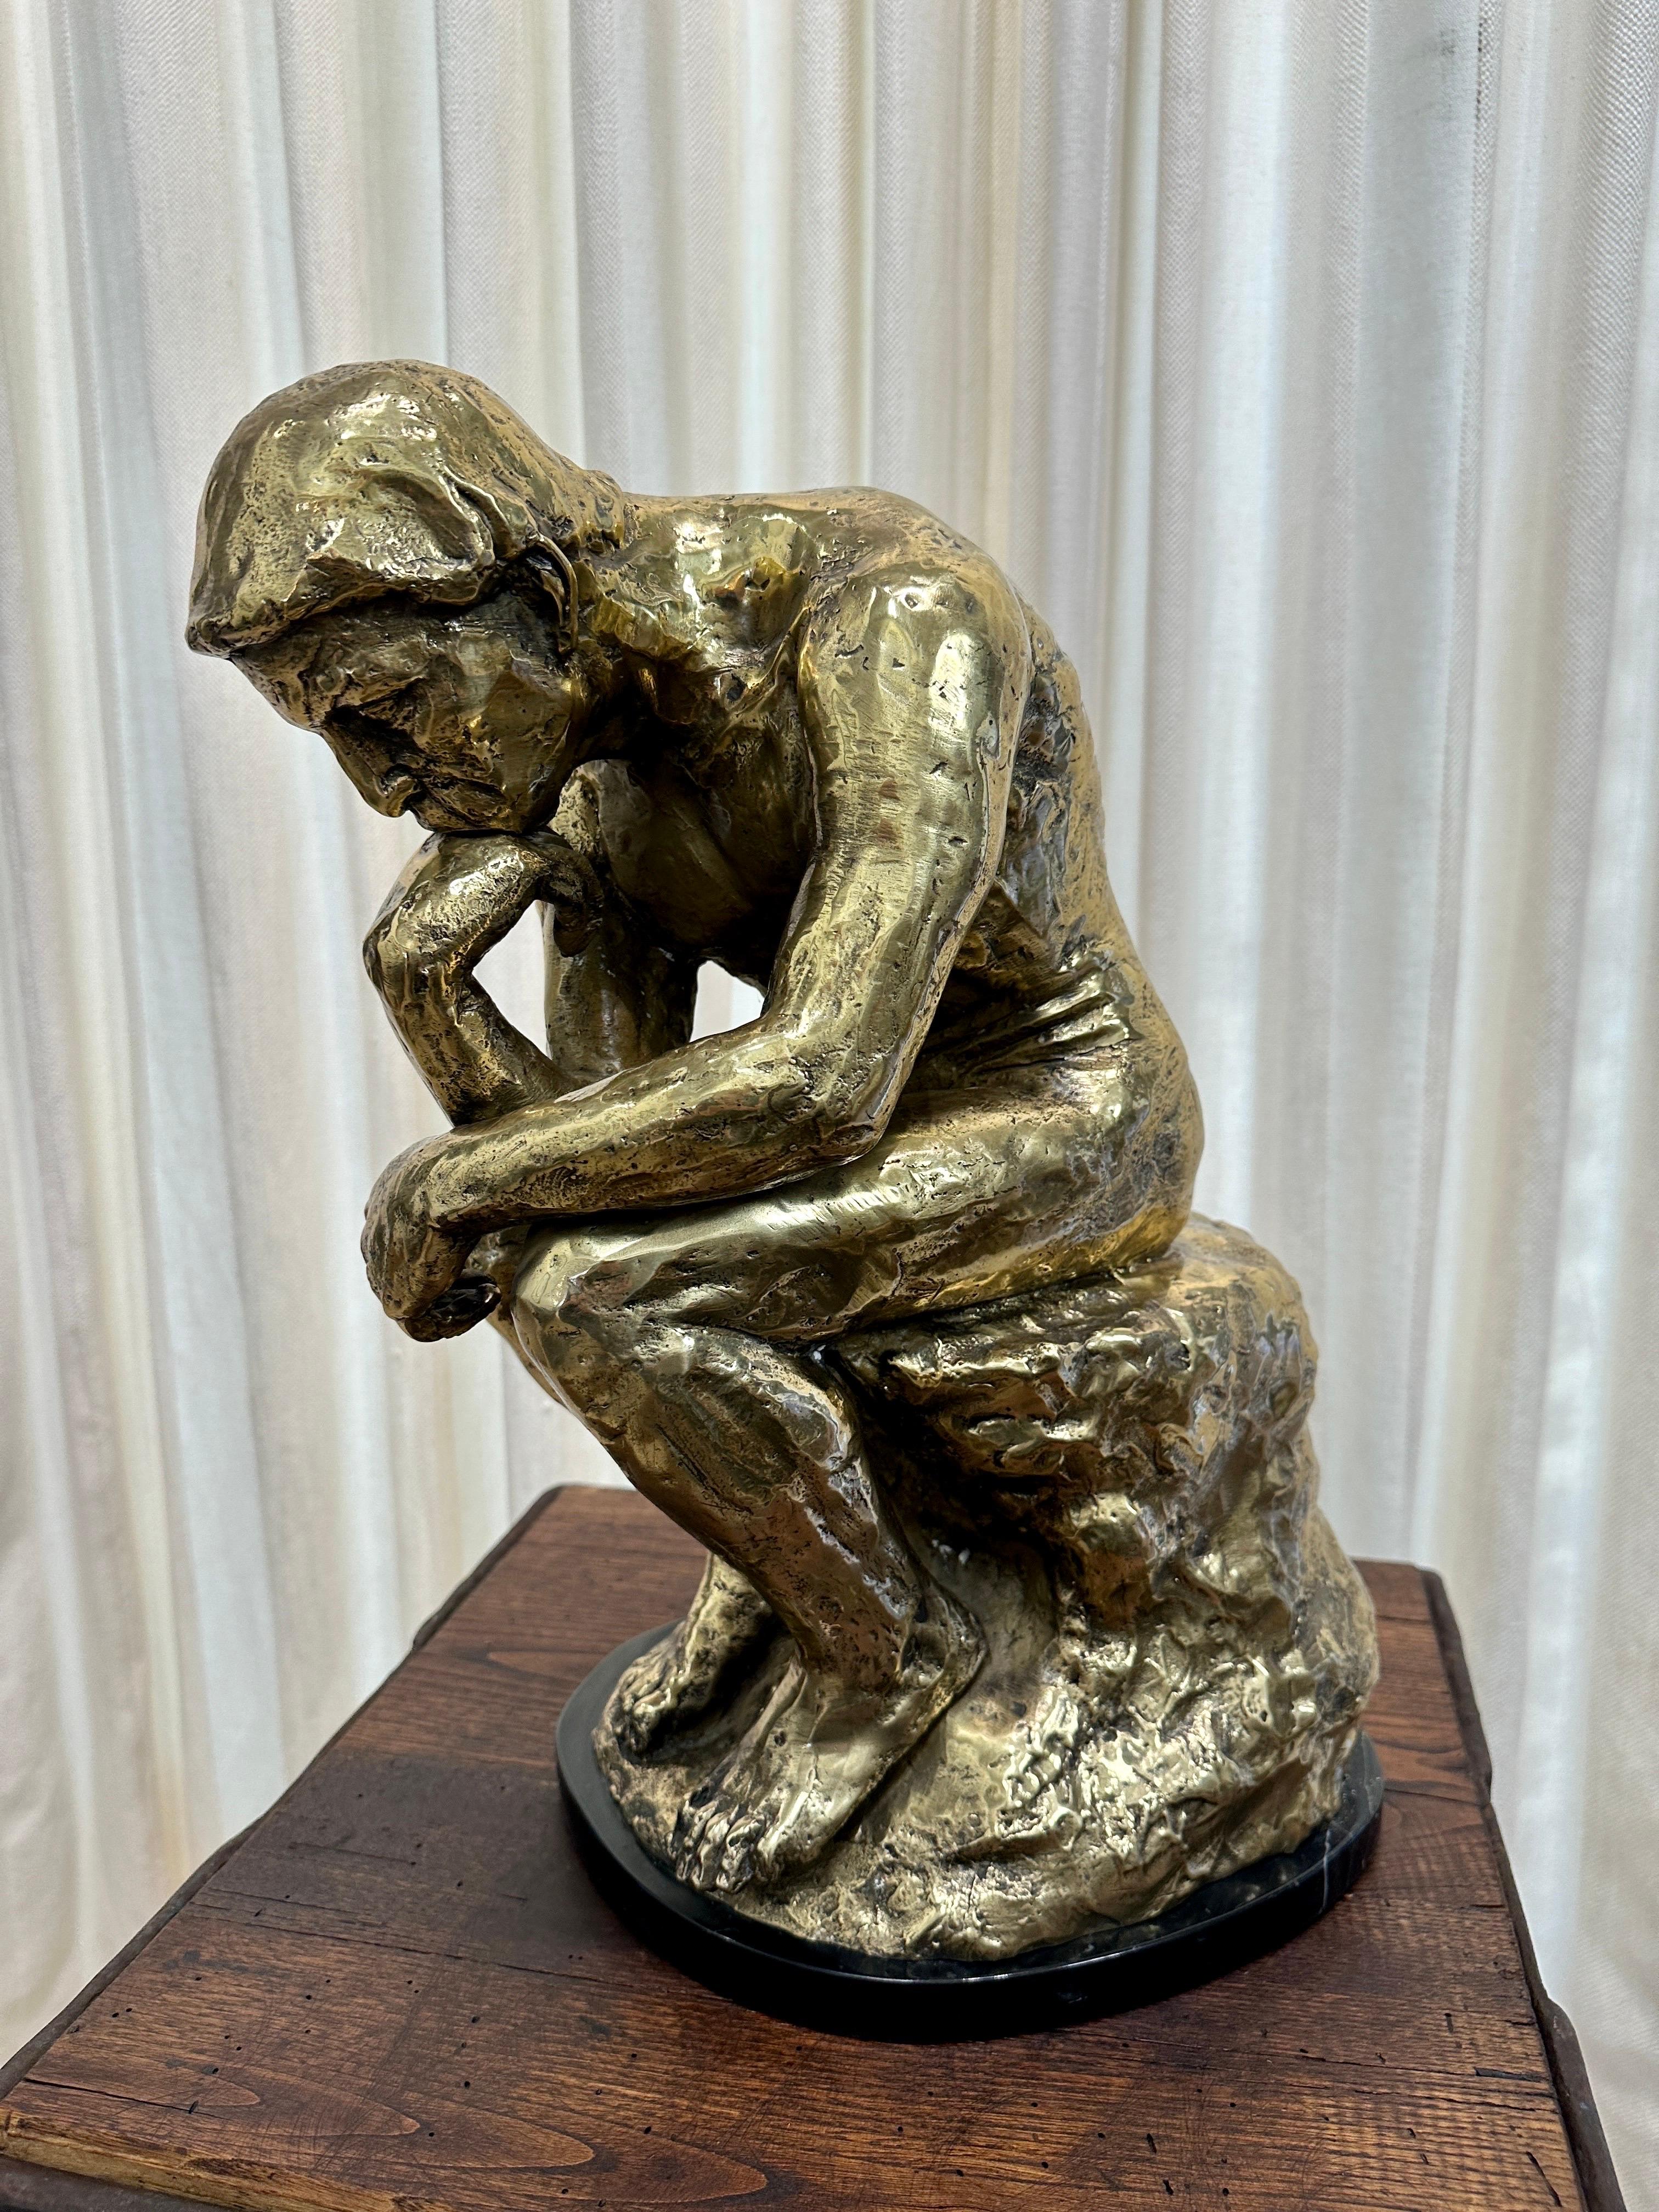 Signed V. Martin, this wonderful version of Rodin's renowned sculpture, The Thinker, is made of patinated brass and sits atop a black marble base.  Pedestal shown is sold separately BUT is perfect for this piece.  THIS ITEM IS LOCATED AND WILL SHIP